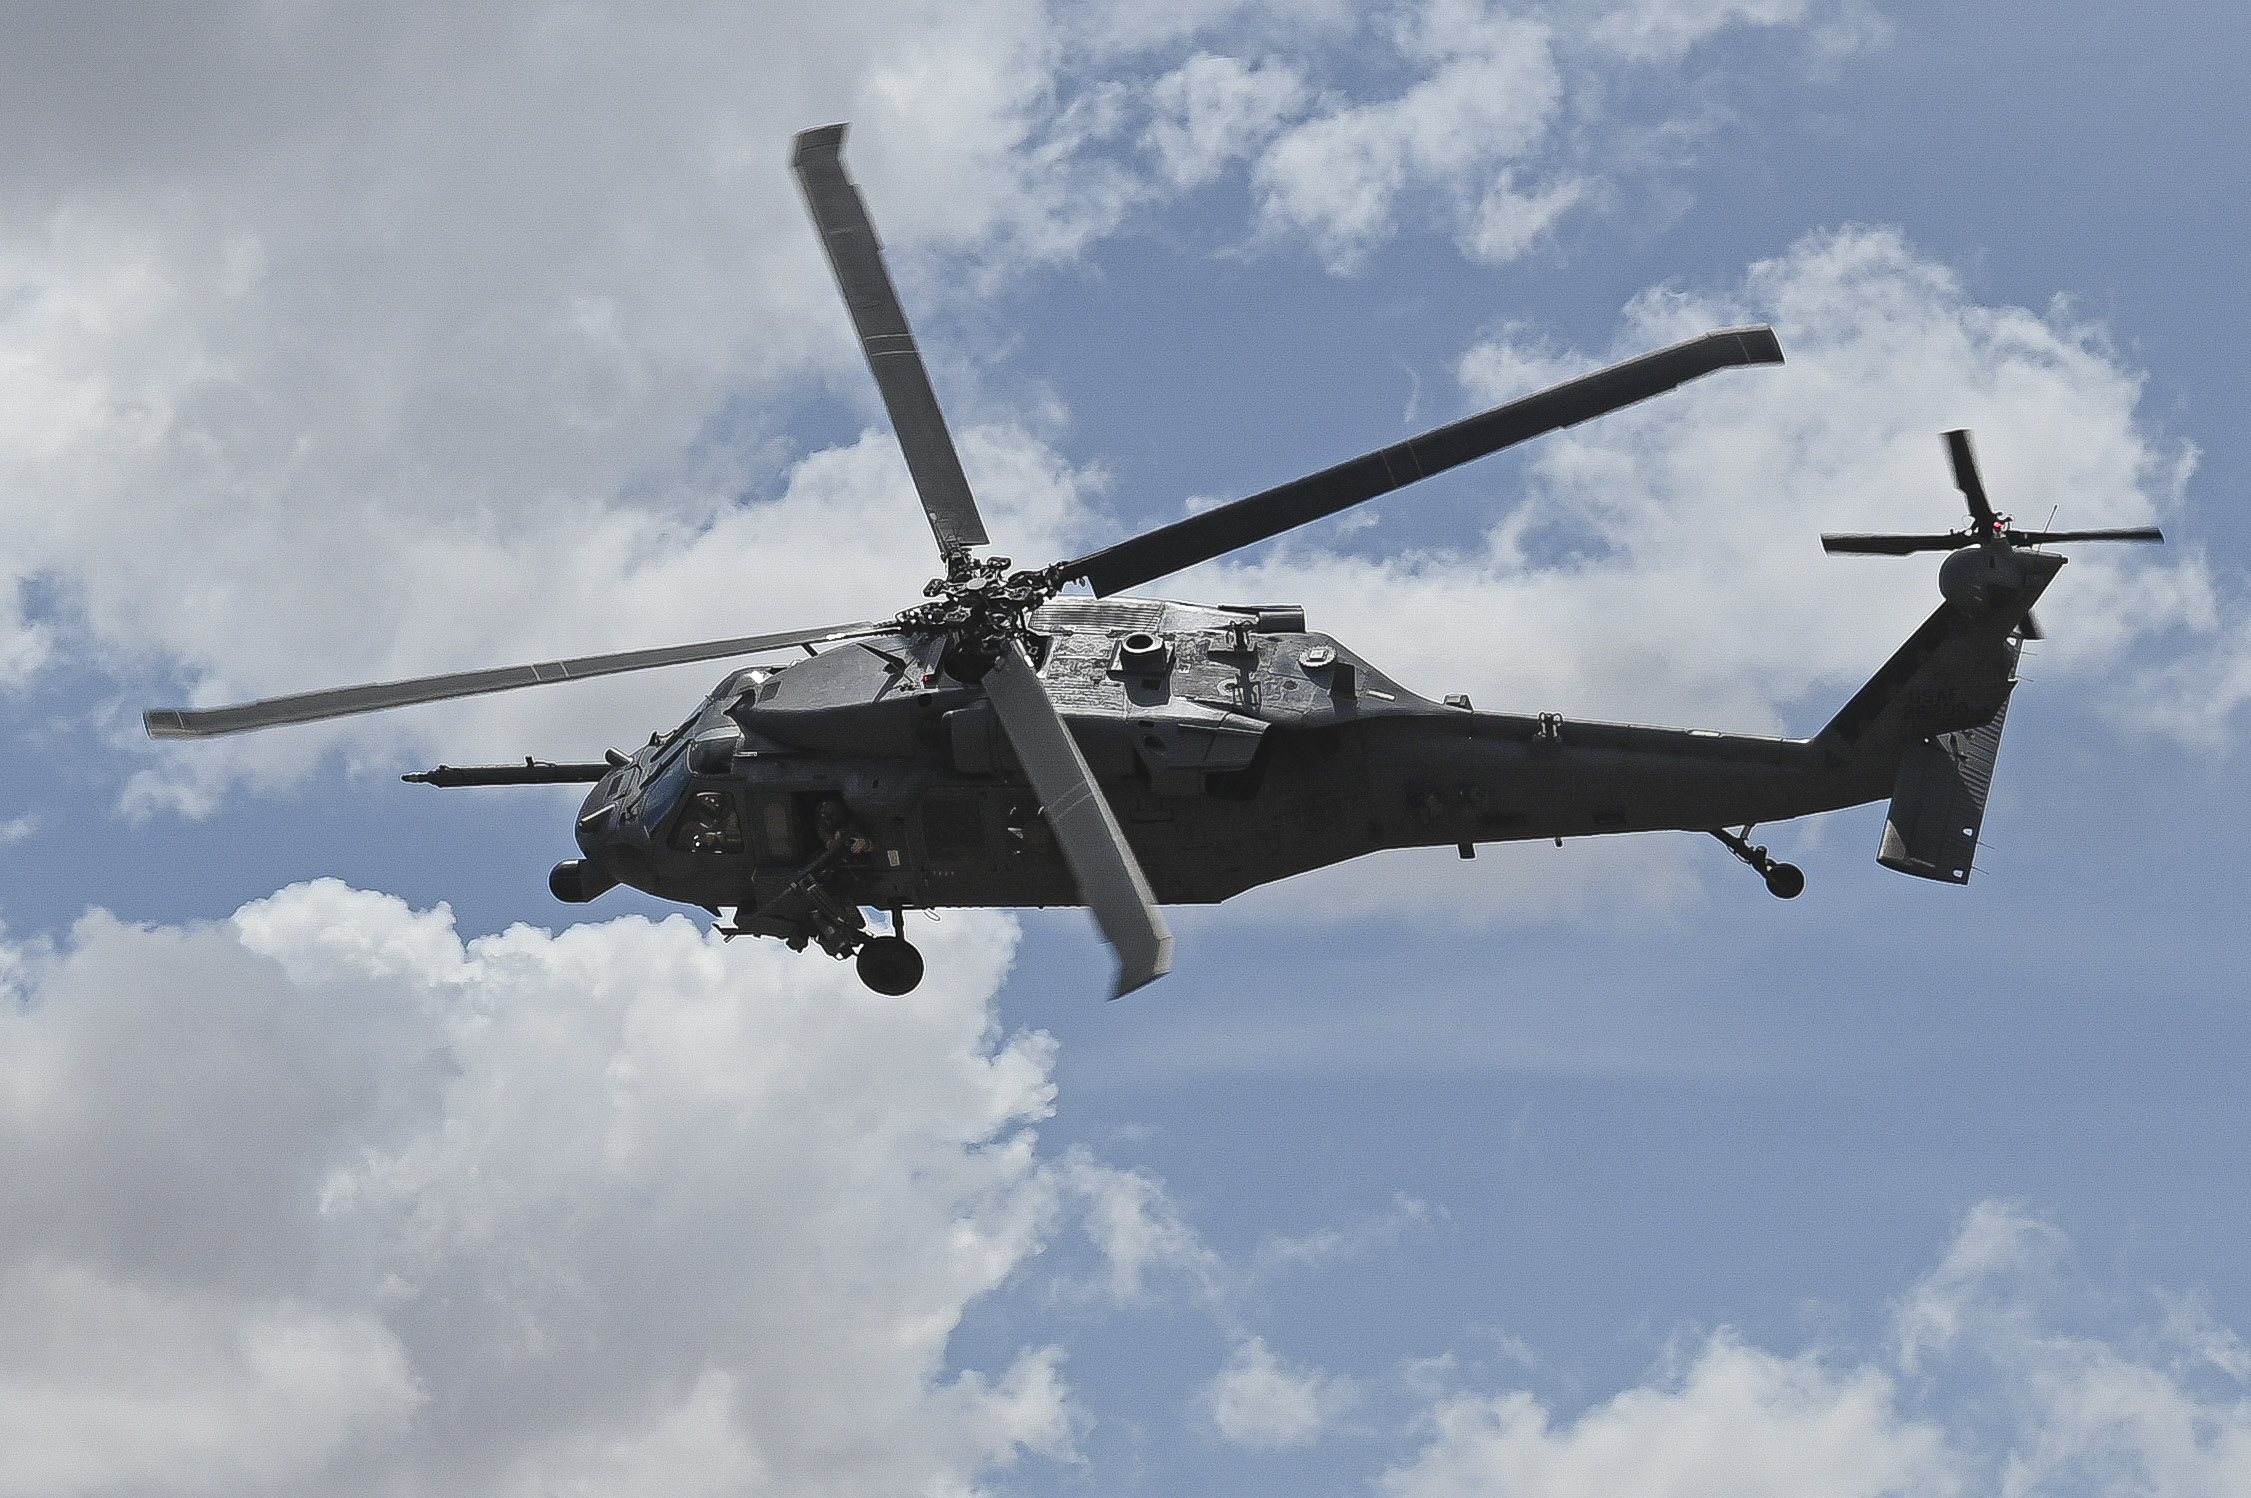 Image shows a helicopter flying.